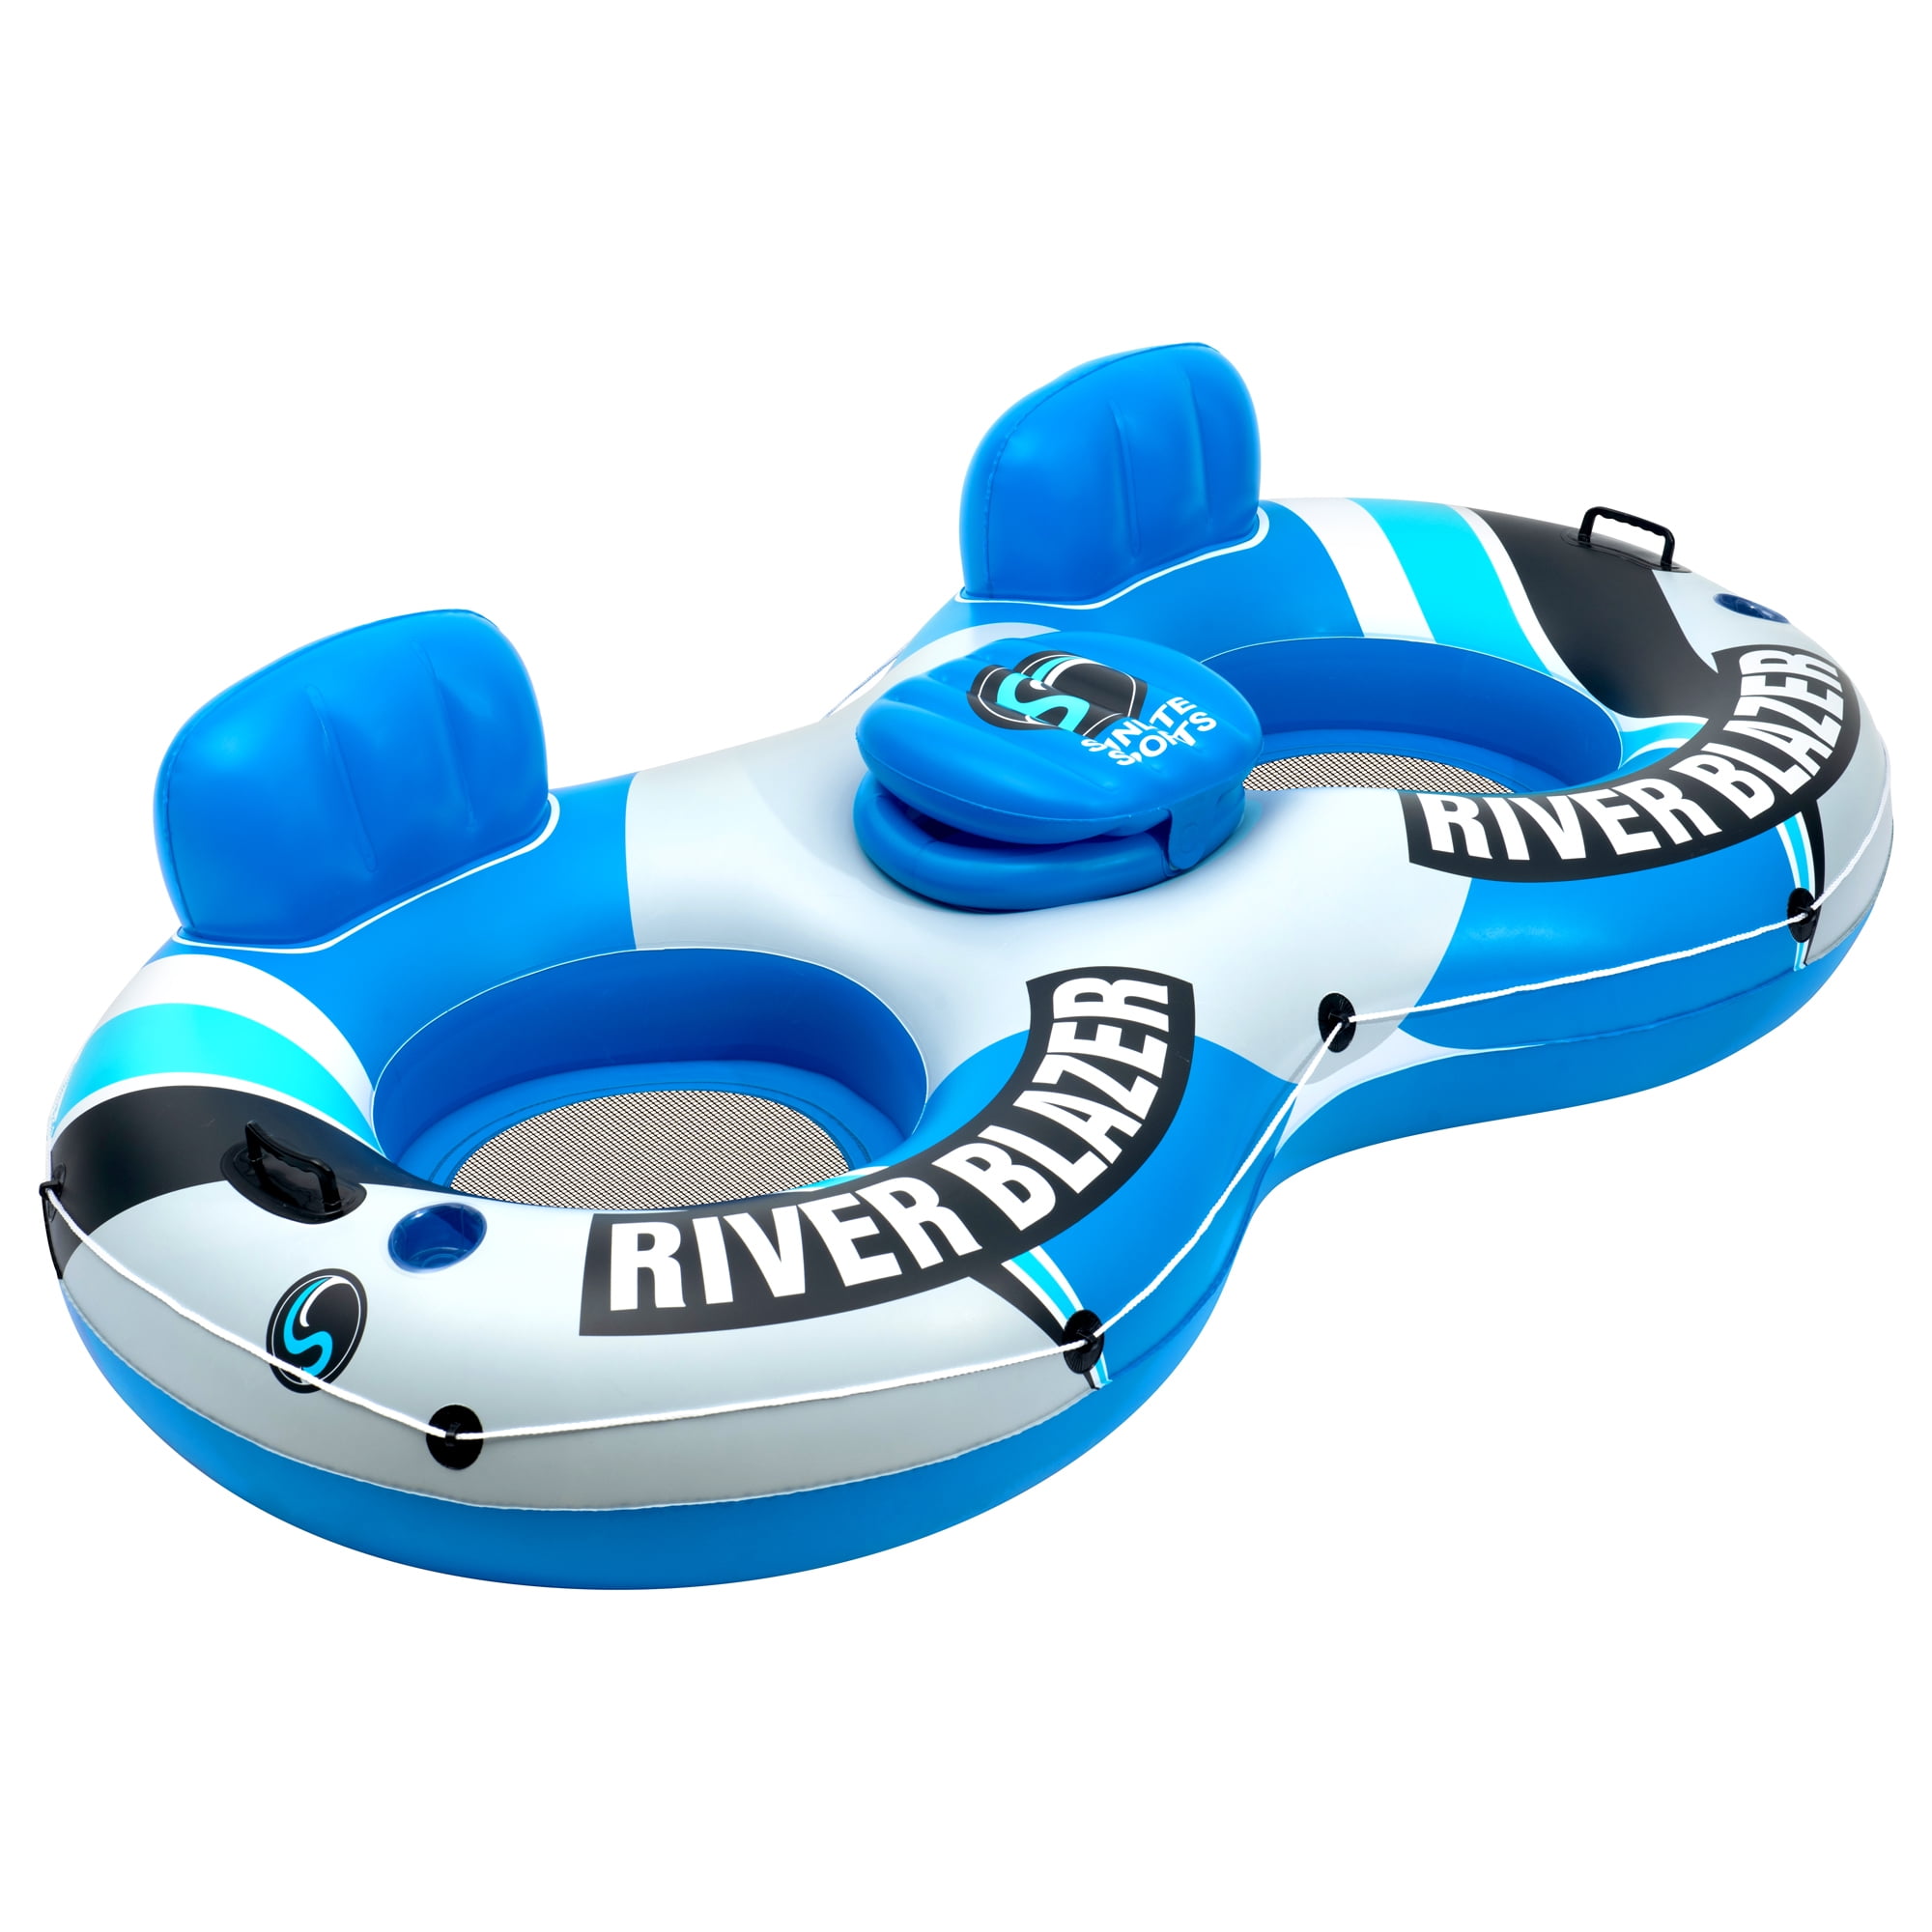 Sunlite Sports 2-Person River Raft Heavy Duty Inflatable, Water Float To  Lounge Above Lake and River, Outdoor Water Tube Sport Fun, Recreational  Use